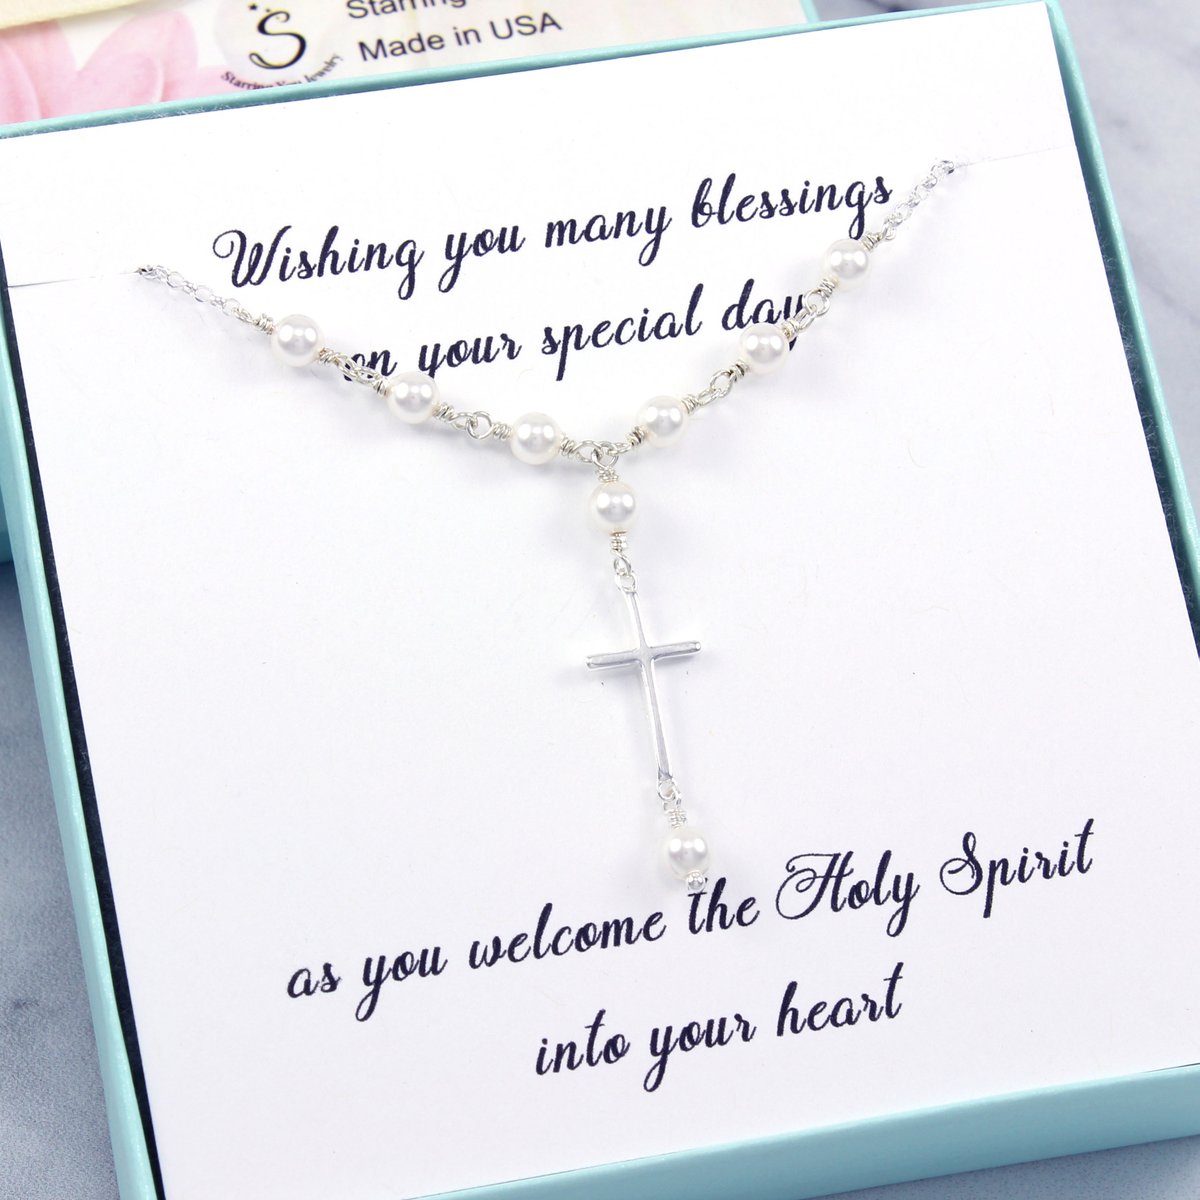 A lovely gift idea for a Confirmation/First Communion🎁creatoriq.cc/481S2w9 #etsy #etsyfinds #etsyseller #etsy #etsyfinds #etsygifts #handmadejewelry #crossnecklace #firstcommunion #confirmation #confirmationgift #christiangifts #crossjewelry #giftideas